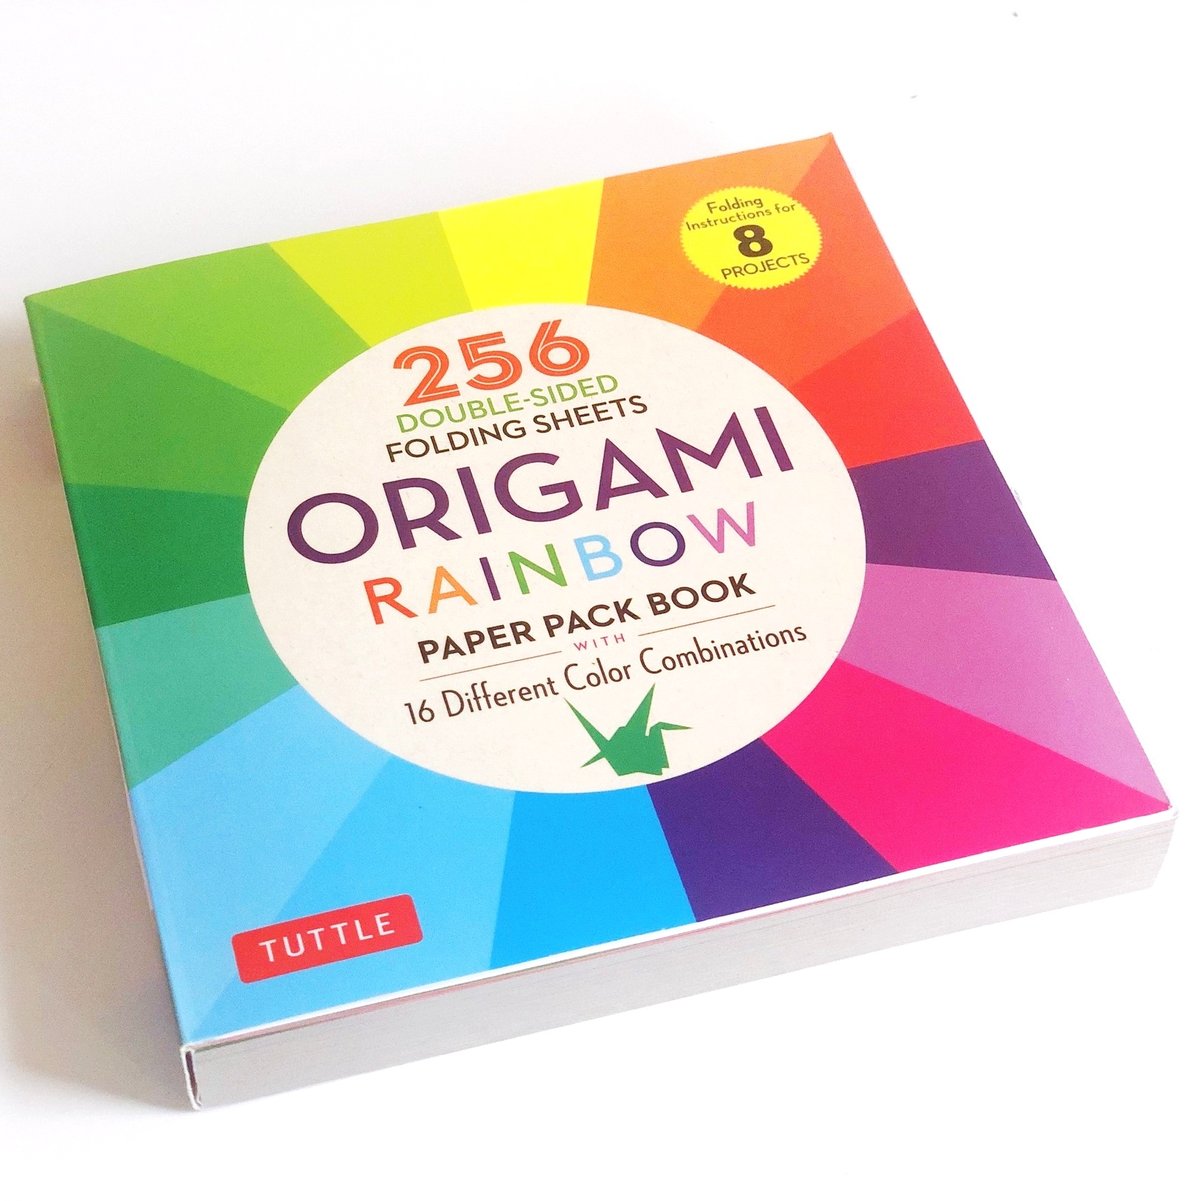 Image of Origami Rainbow Paper Pack Book